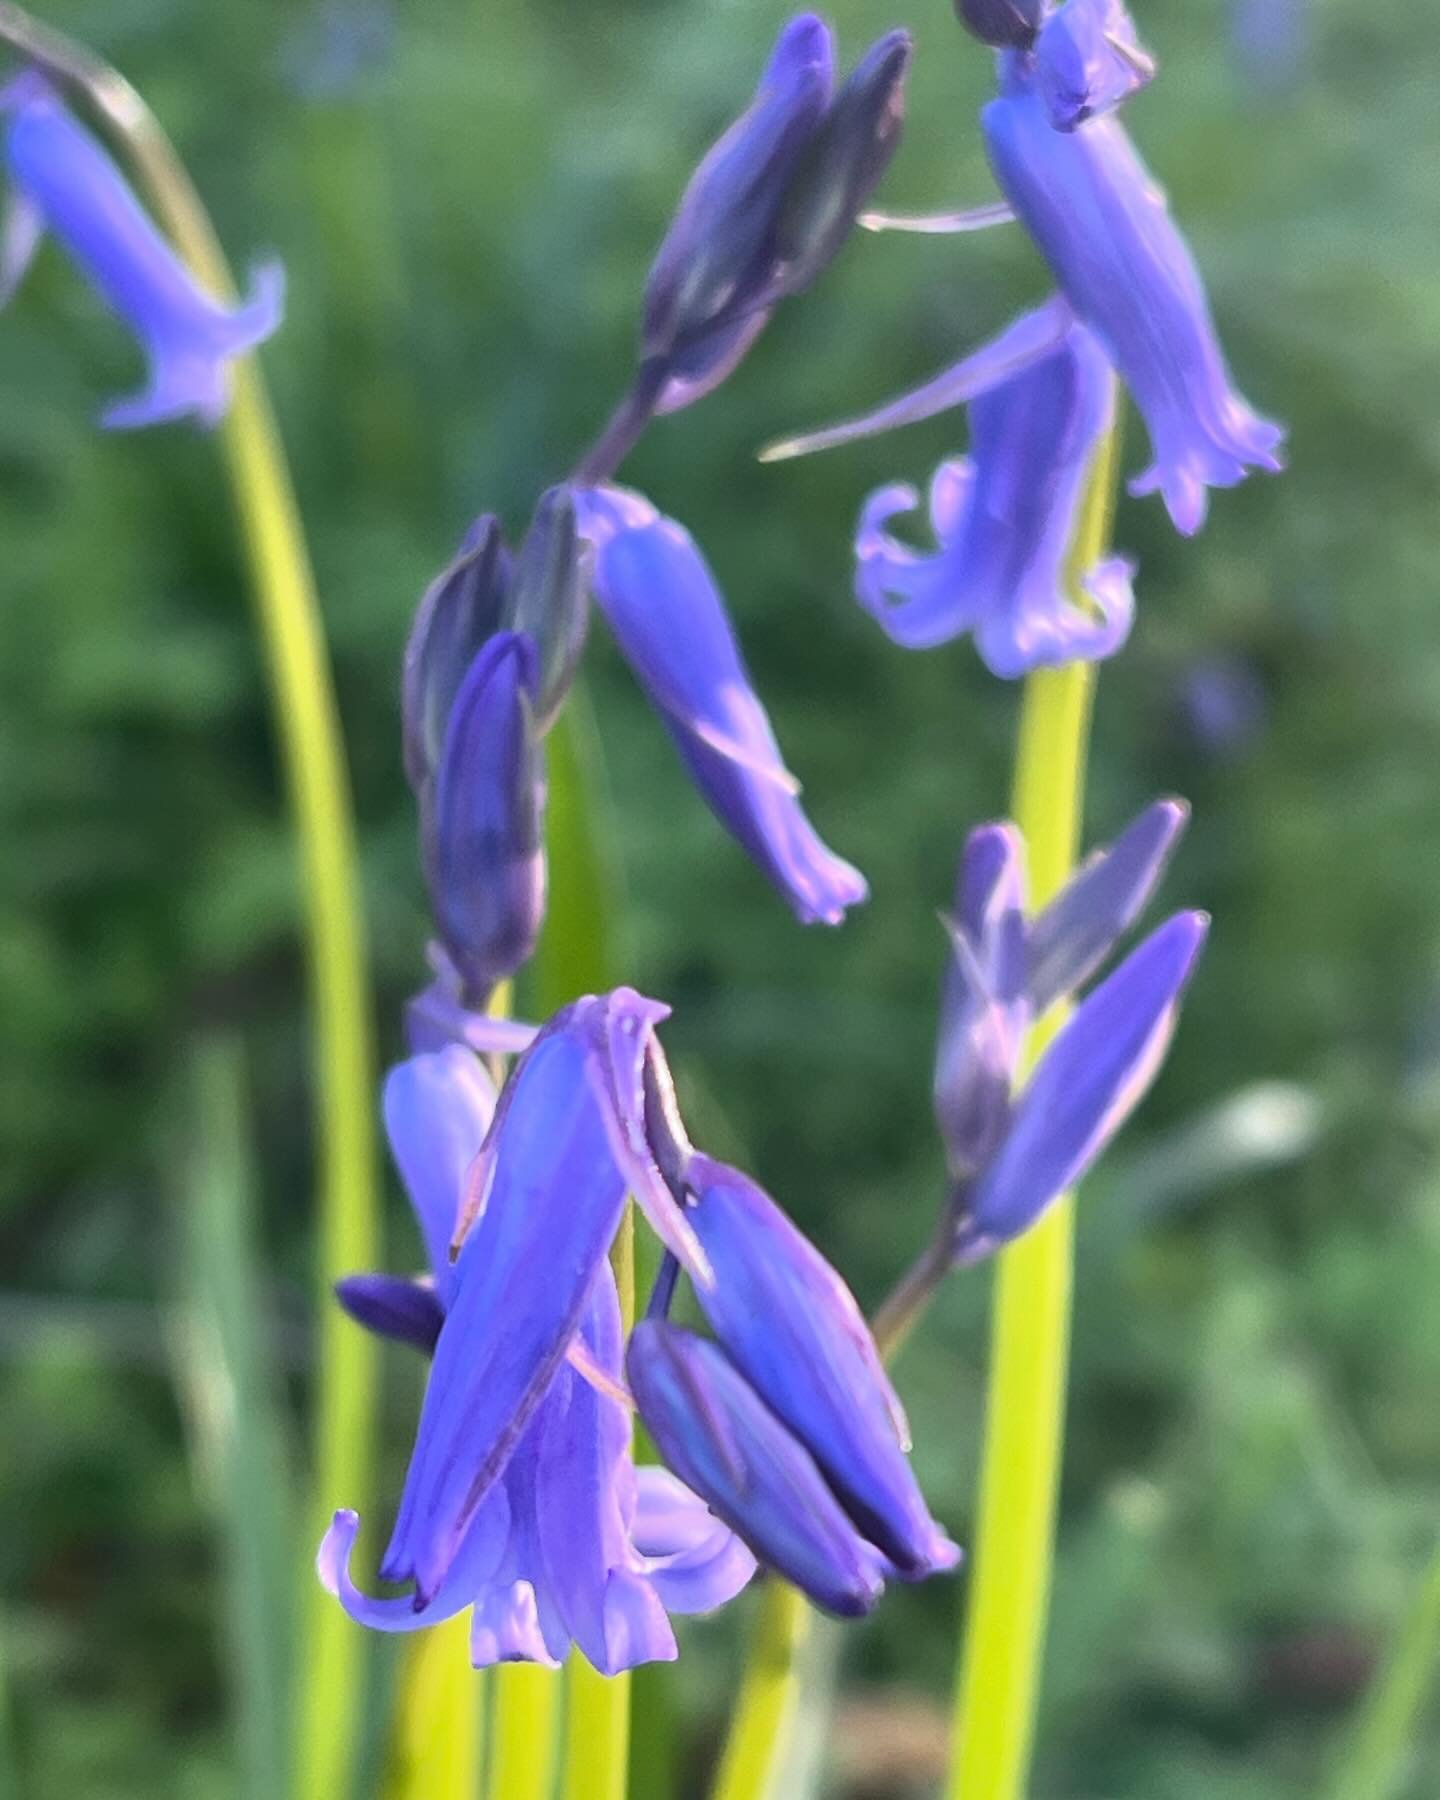 It&rsquo;s such an amazing site, the arrival of the flowers on the English Bluebell that emerged a few weeks ago. Over the next few weeks the show will intensify and draw us to stop, stand and take in the awesome beauty that is nature. From the scent